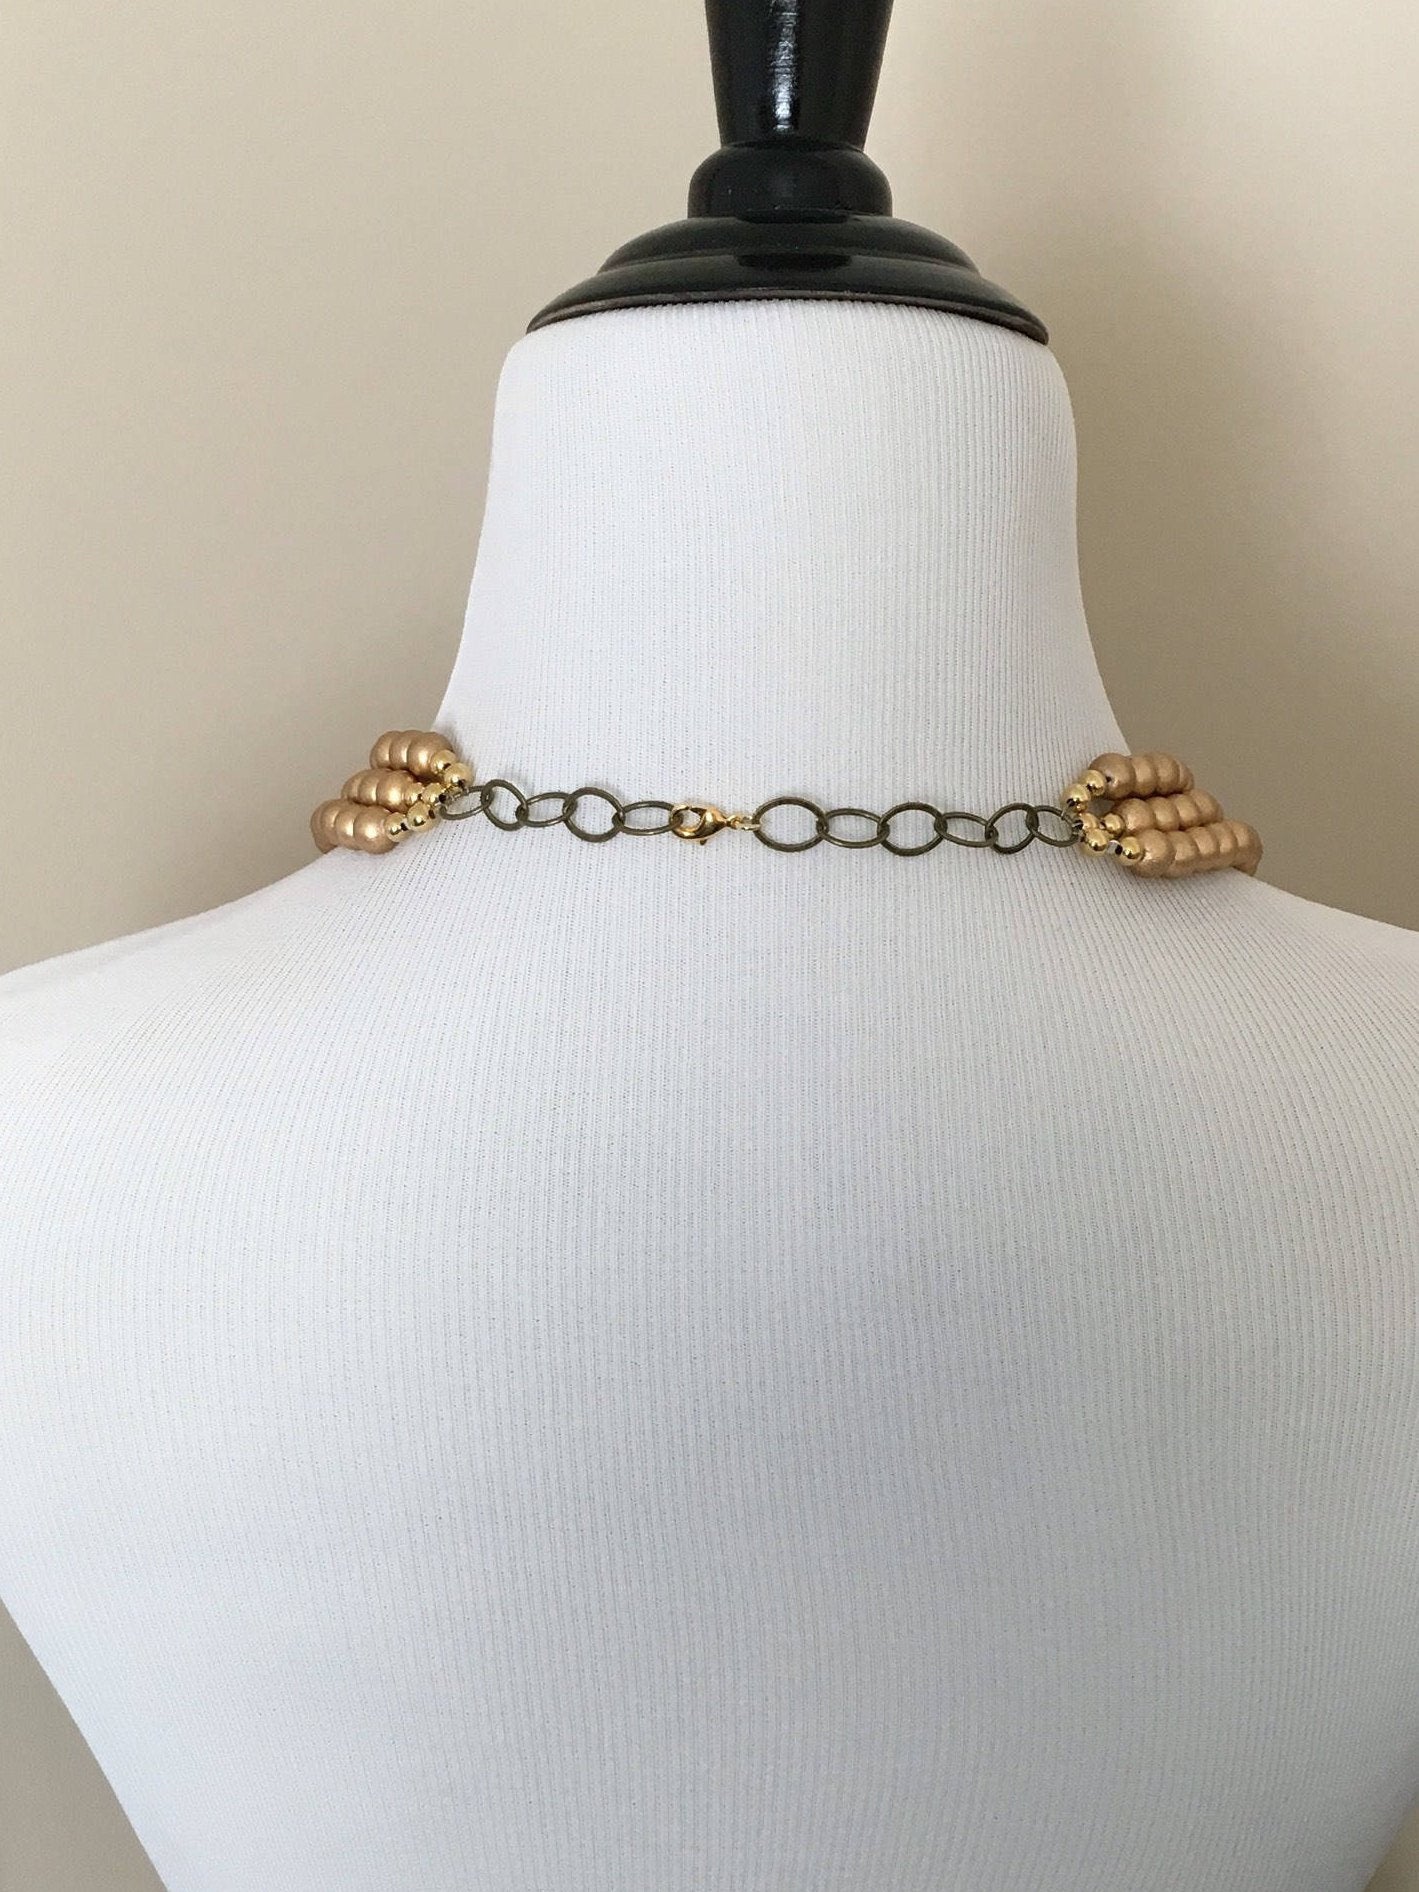 Mannequin turned around to show adjustable chain and lobster clasp on necklace.